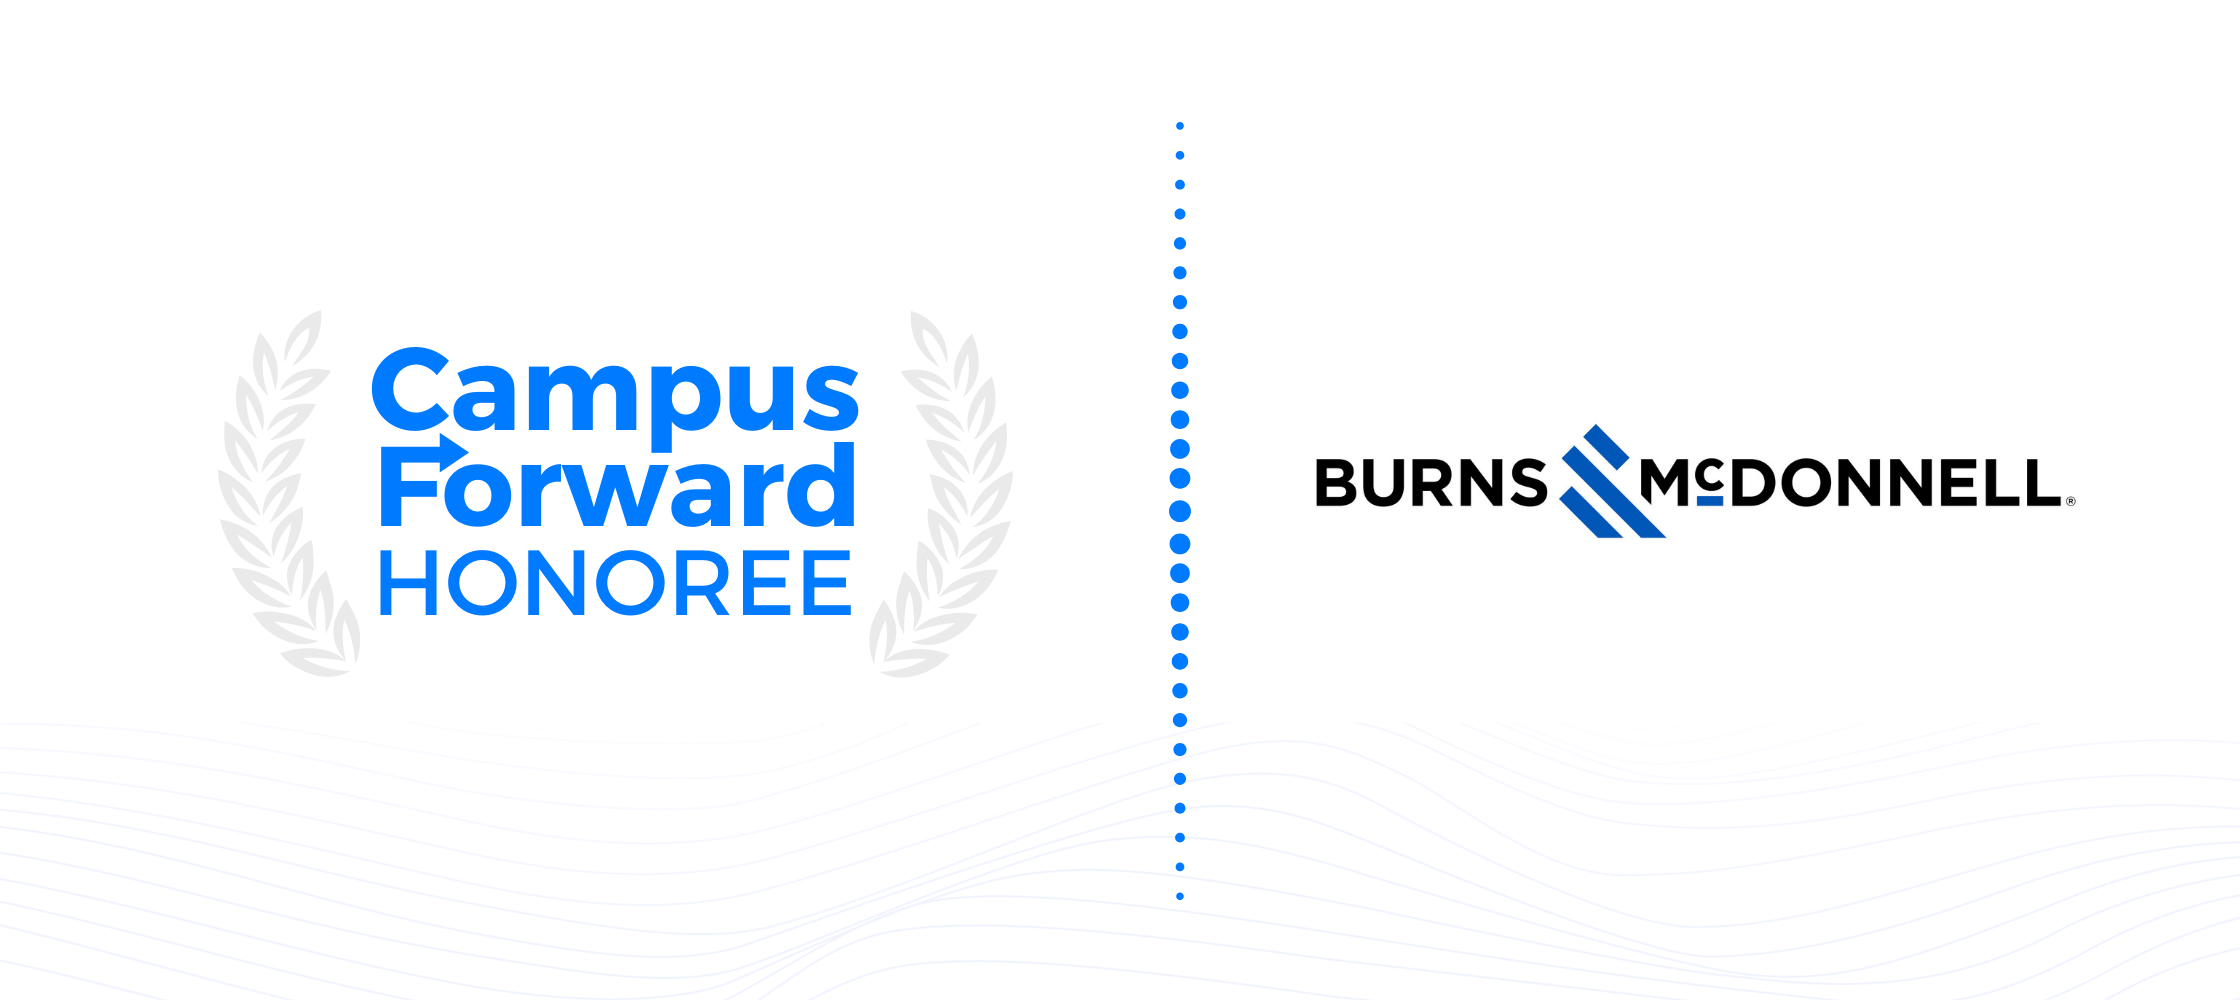 Campus Forward Honoree - Burns & McDonnell